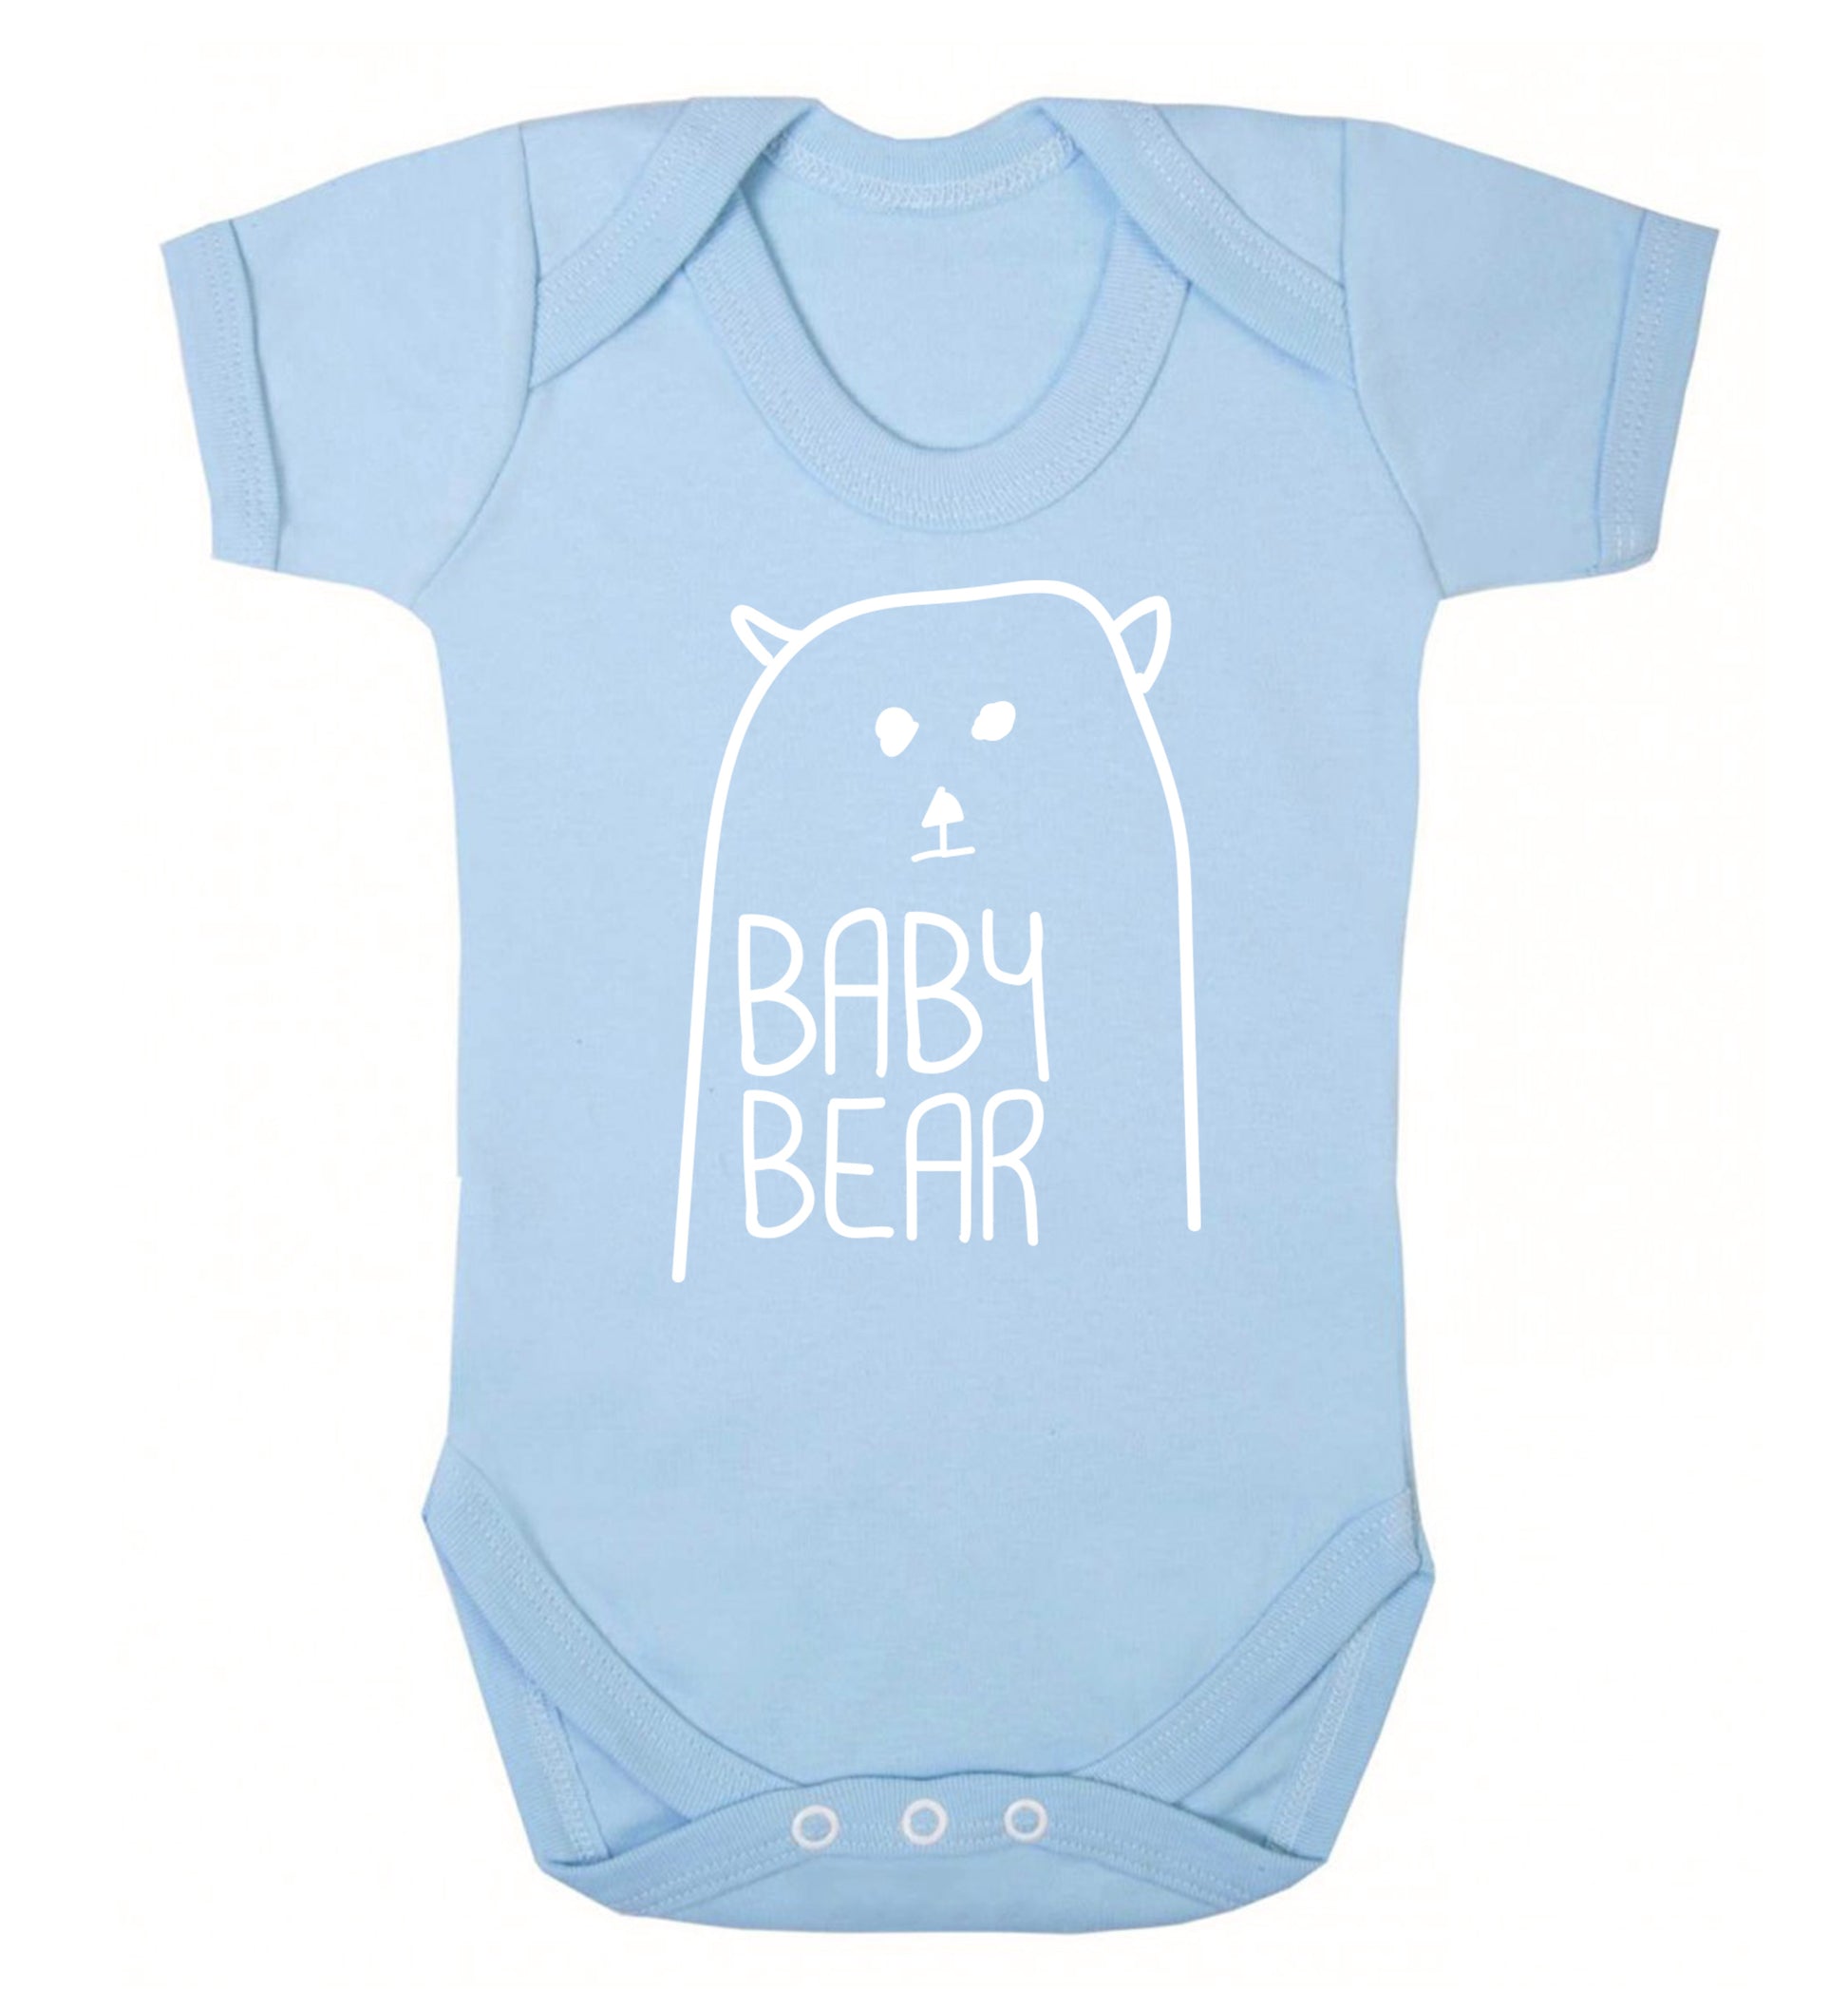 Baby bear Baby Vest pale blue 18-24 months